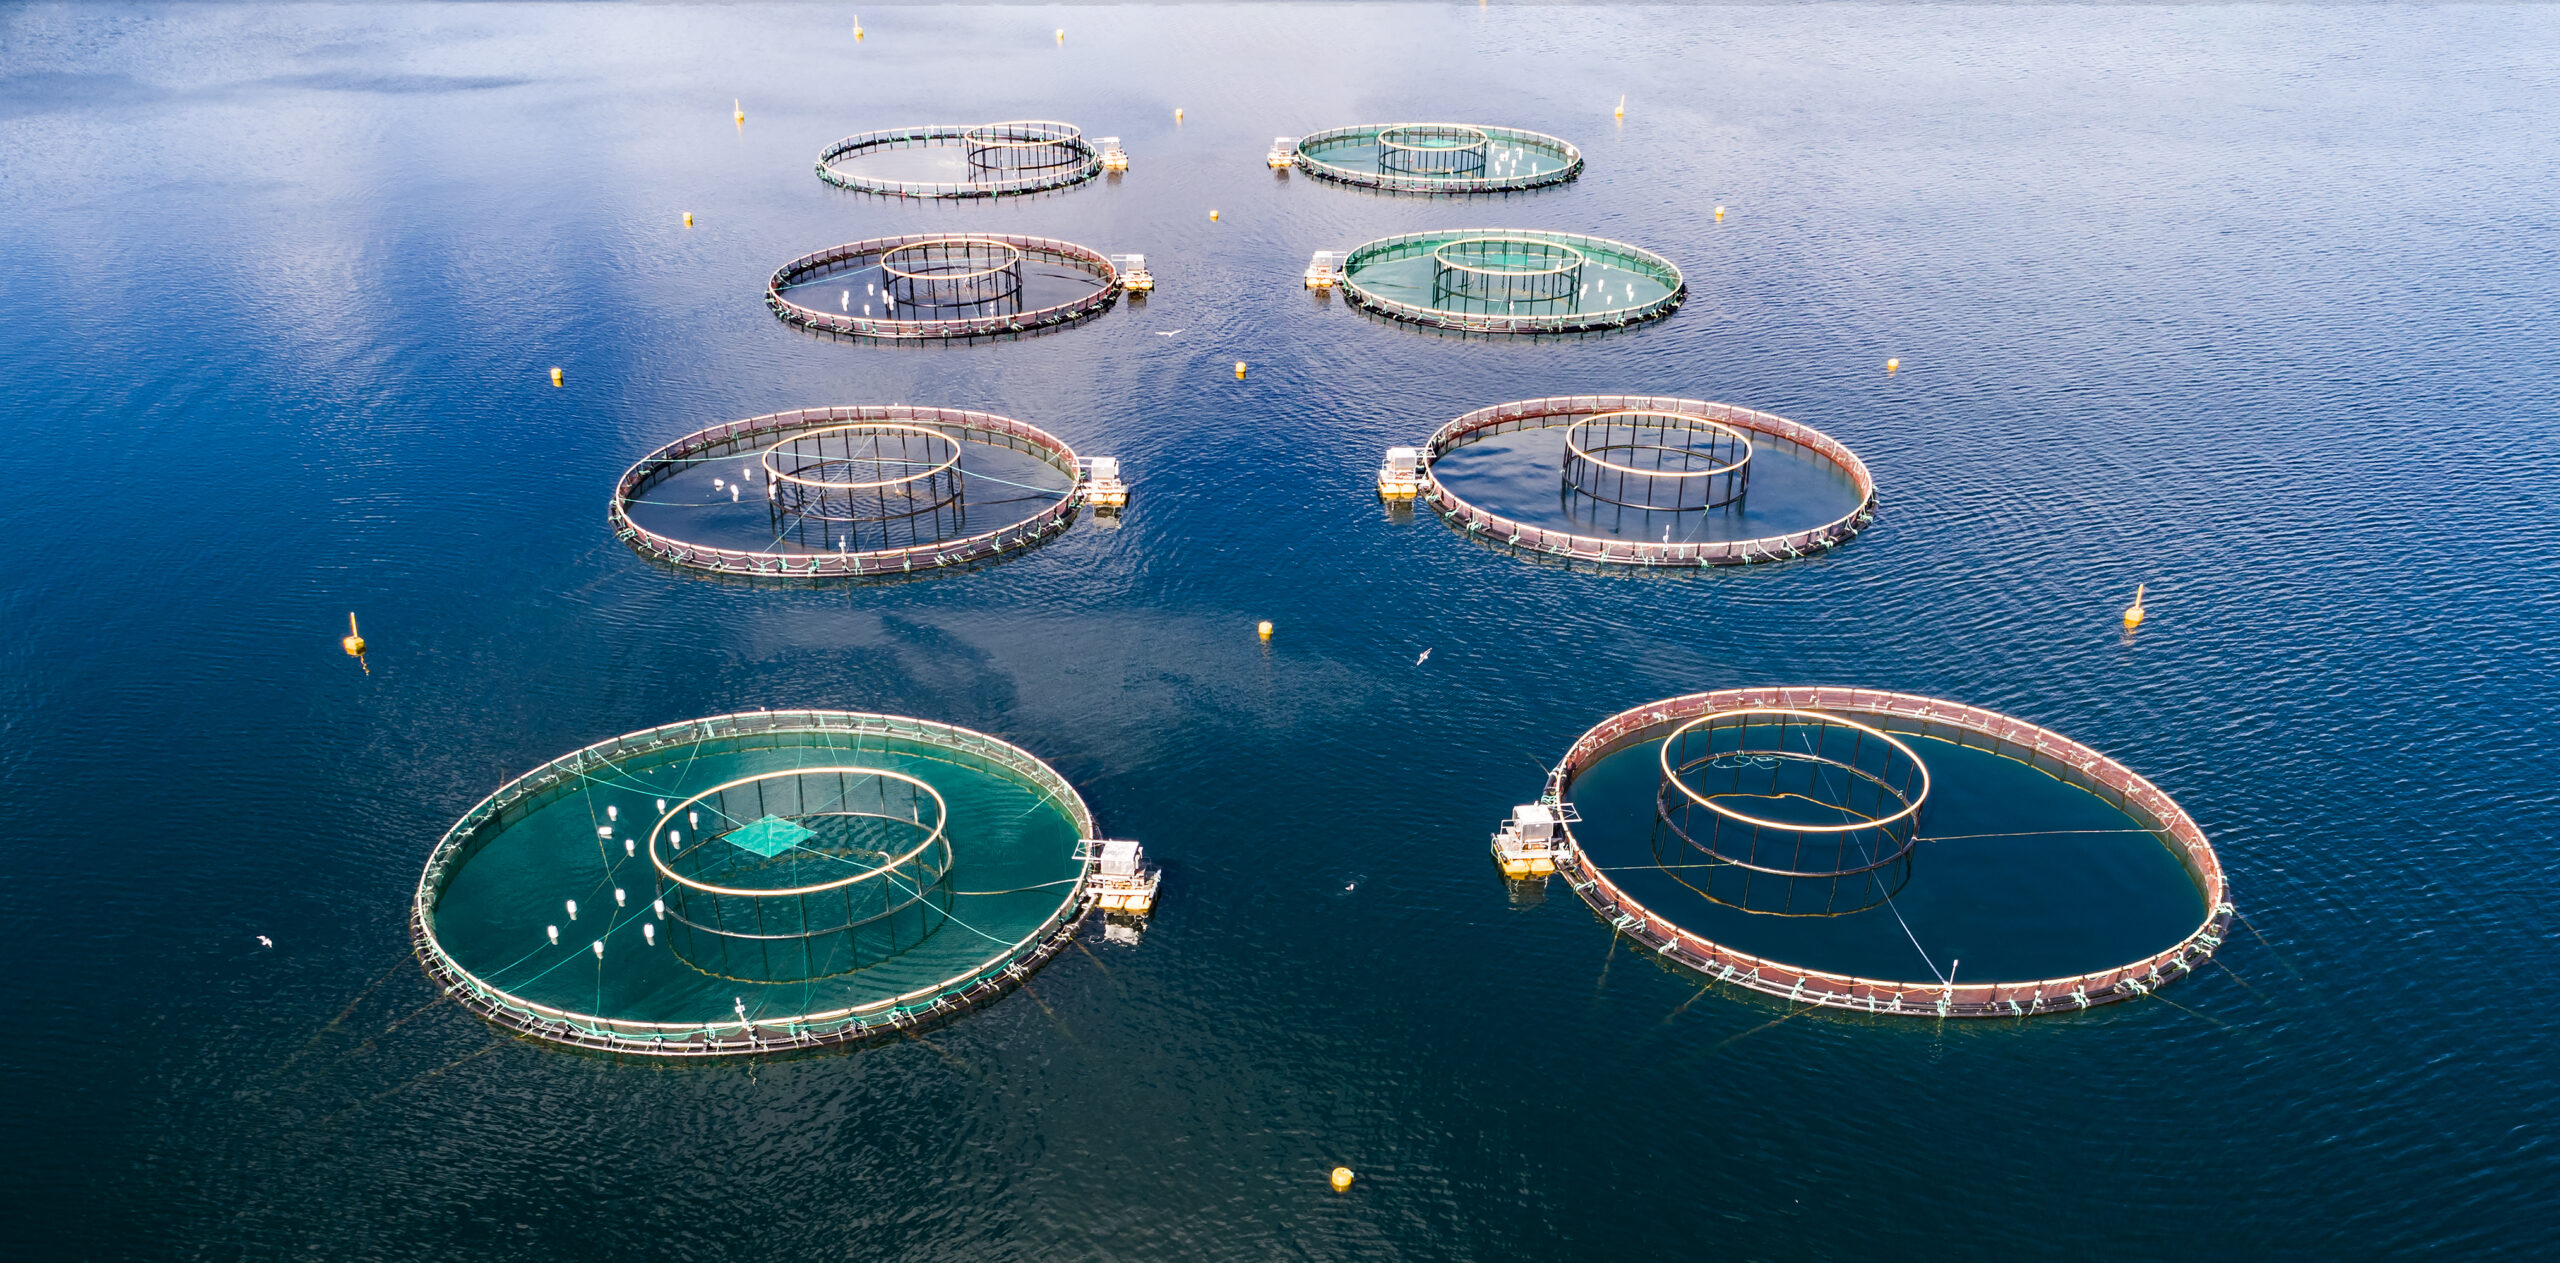 Fish farms out in the water 8 of them circular in shape